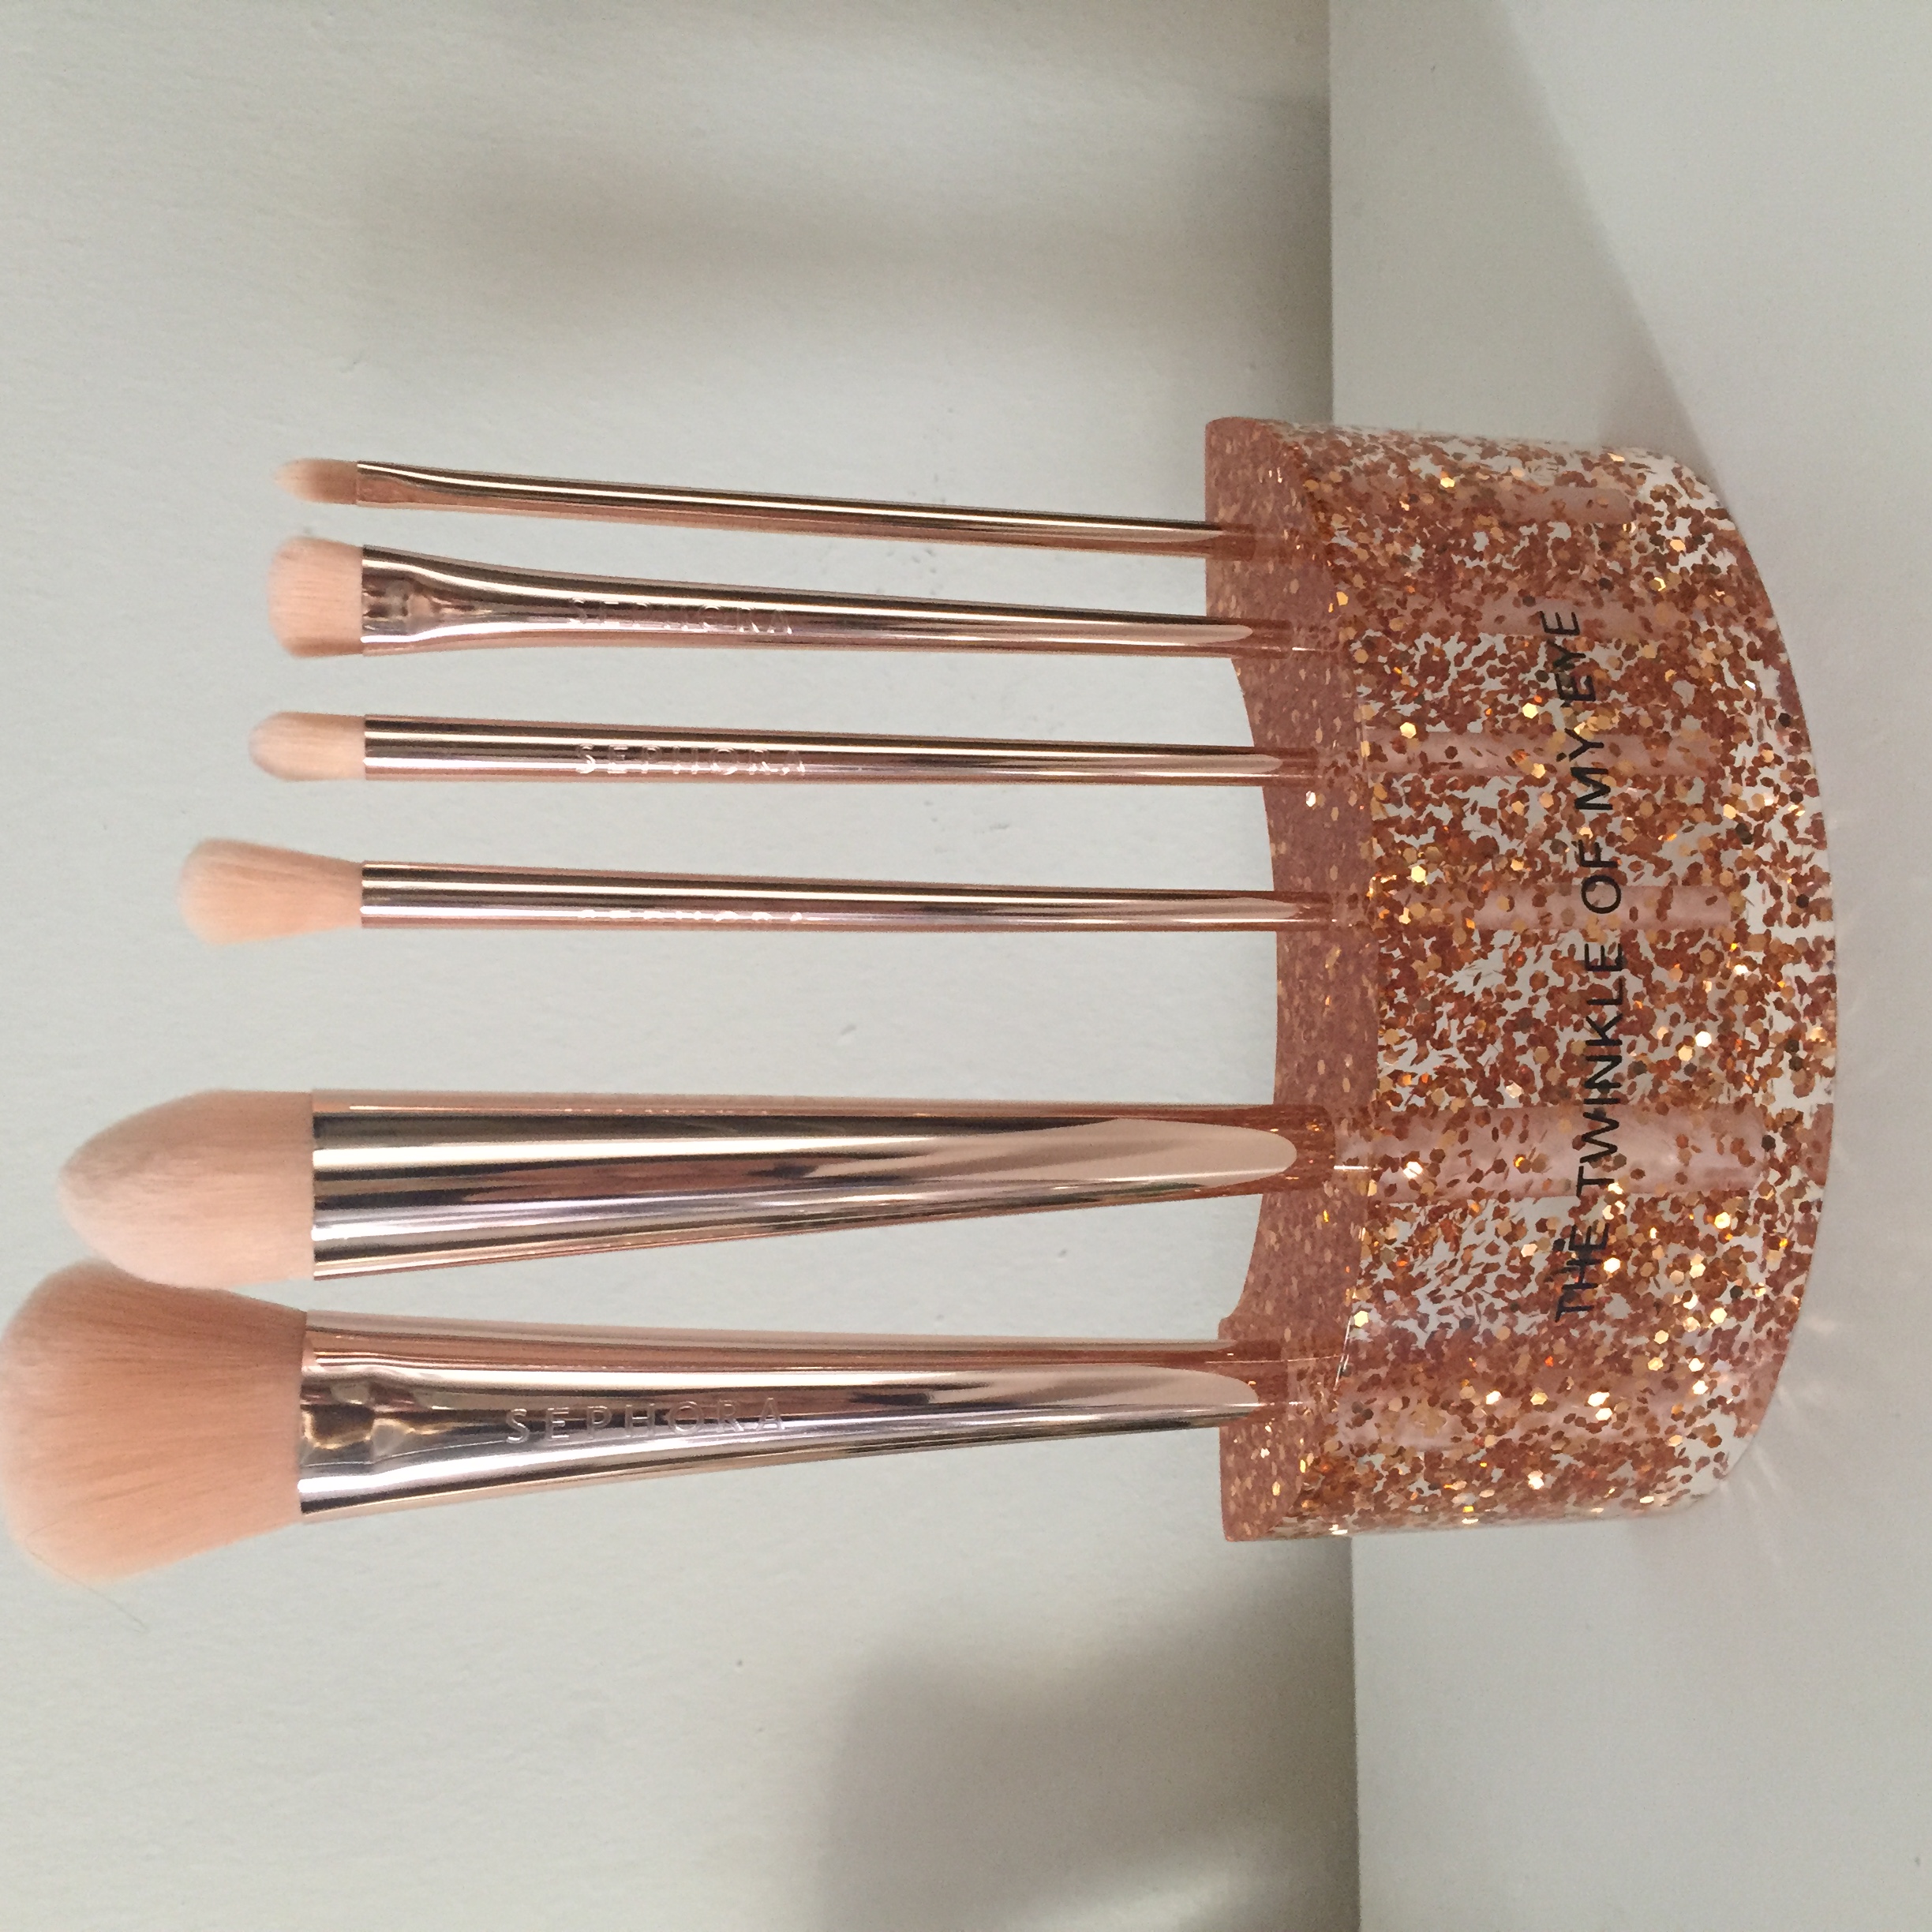 Three Glittery Makeup Brush Sets You Need Now